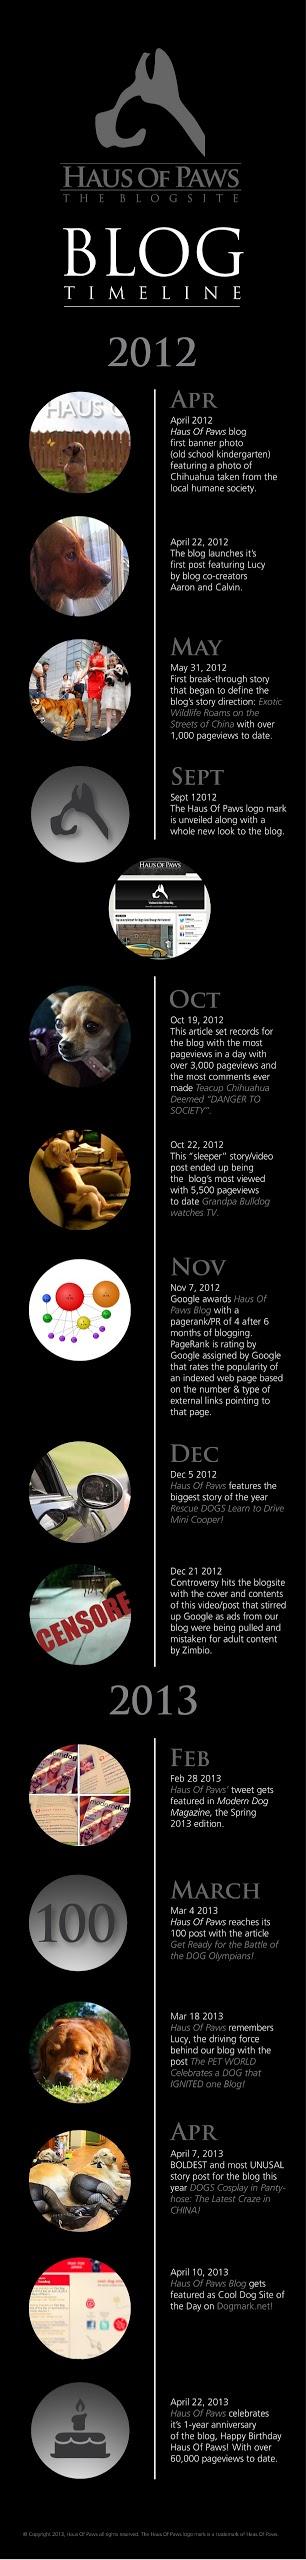 Infographic Celebrates the 1st Anniversary of Our Blog!